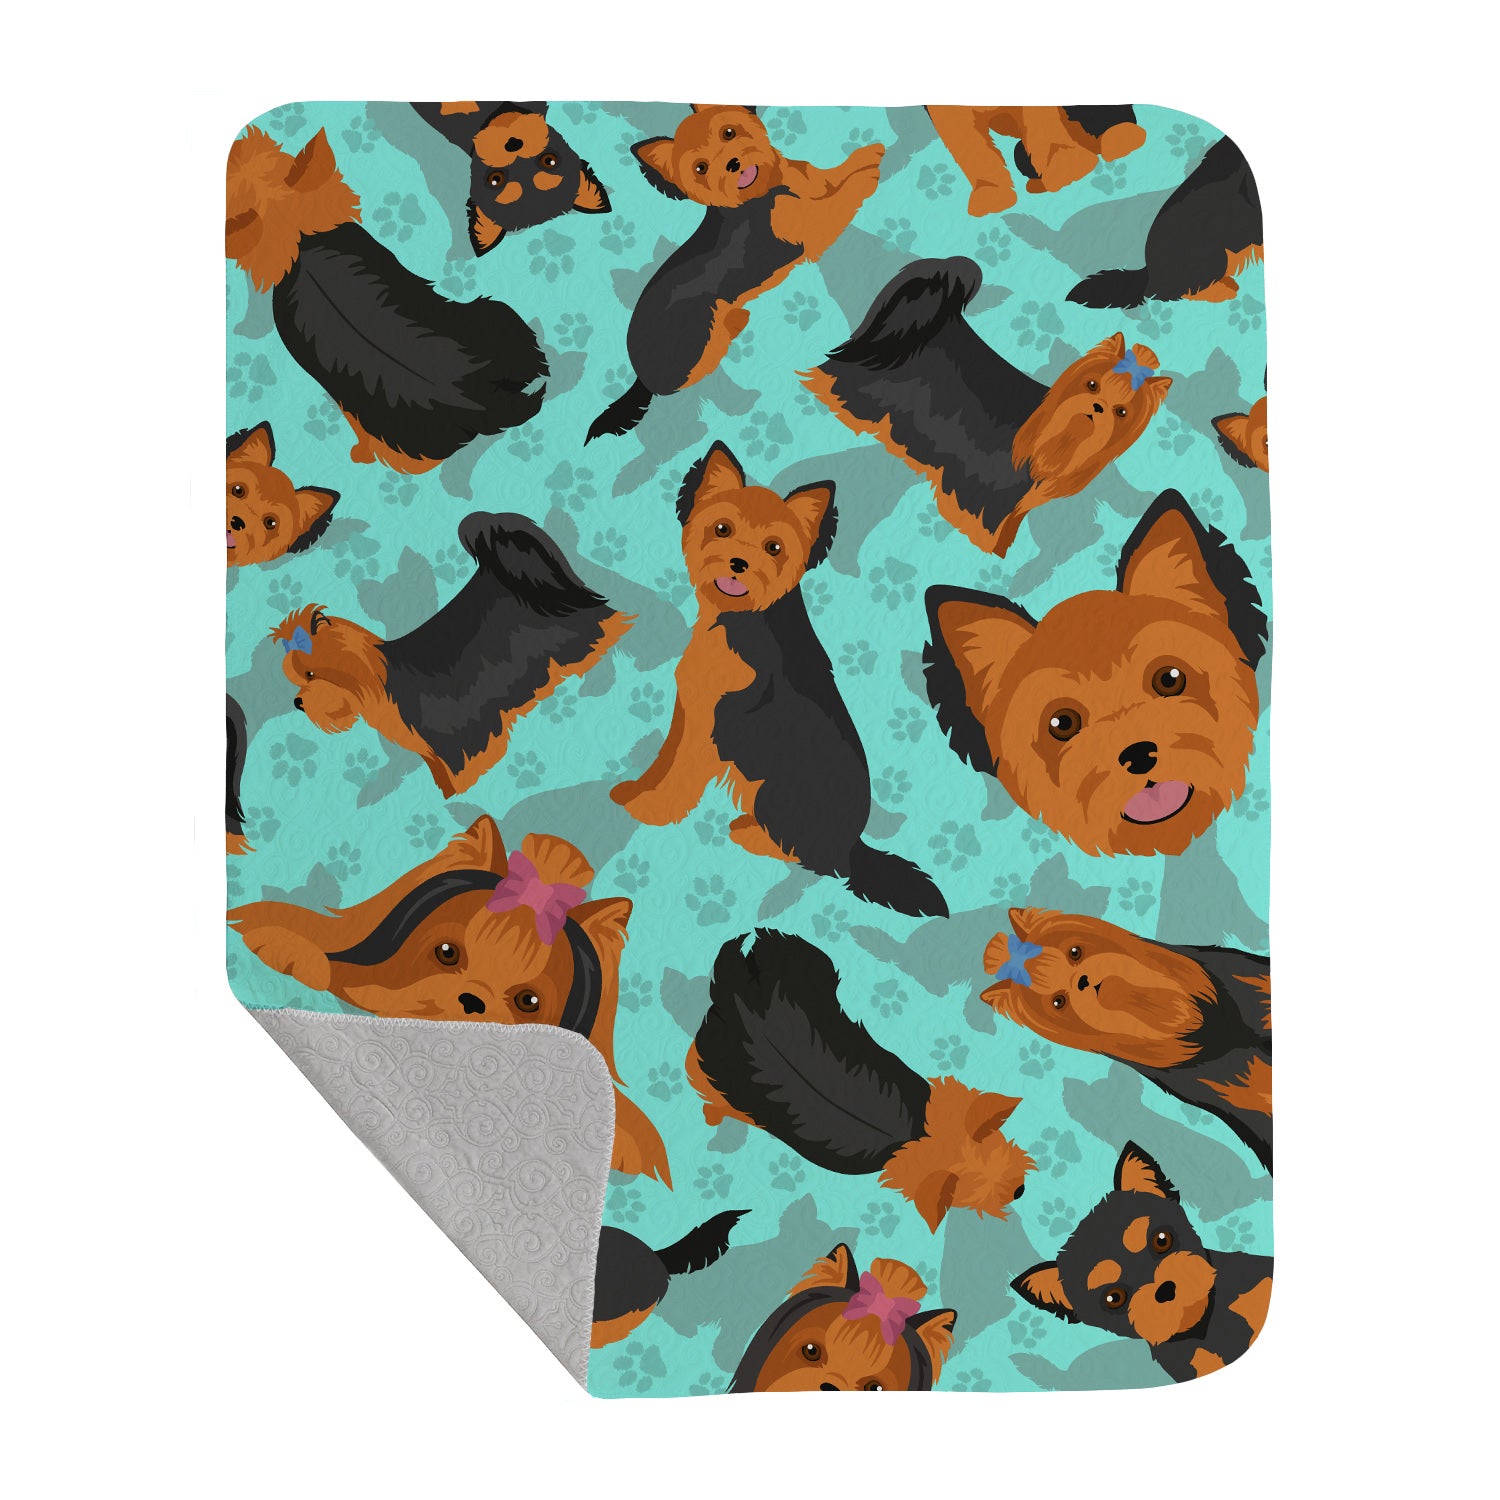 Buy this Black and Tan Yorkie Quilted Blanket 50x60